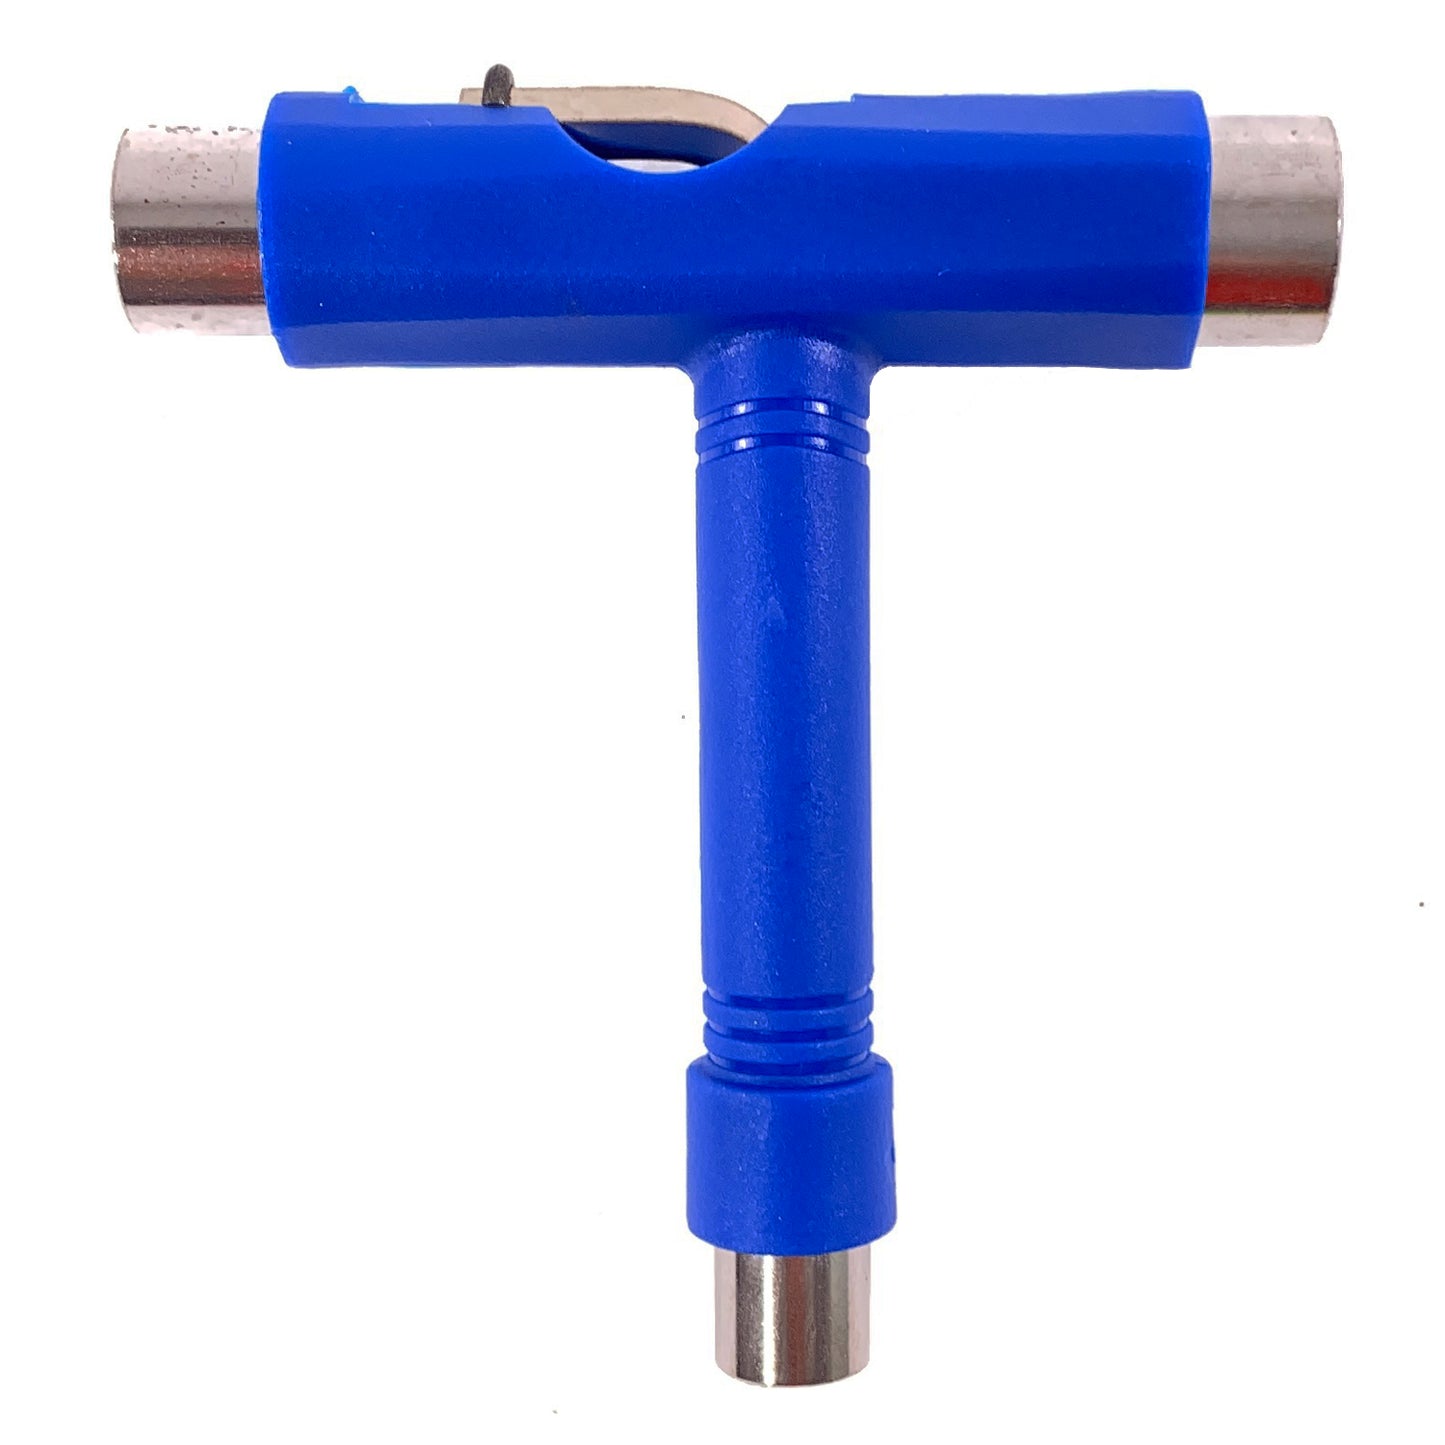 G-Tool - Royal Blue - Prime Delux Store